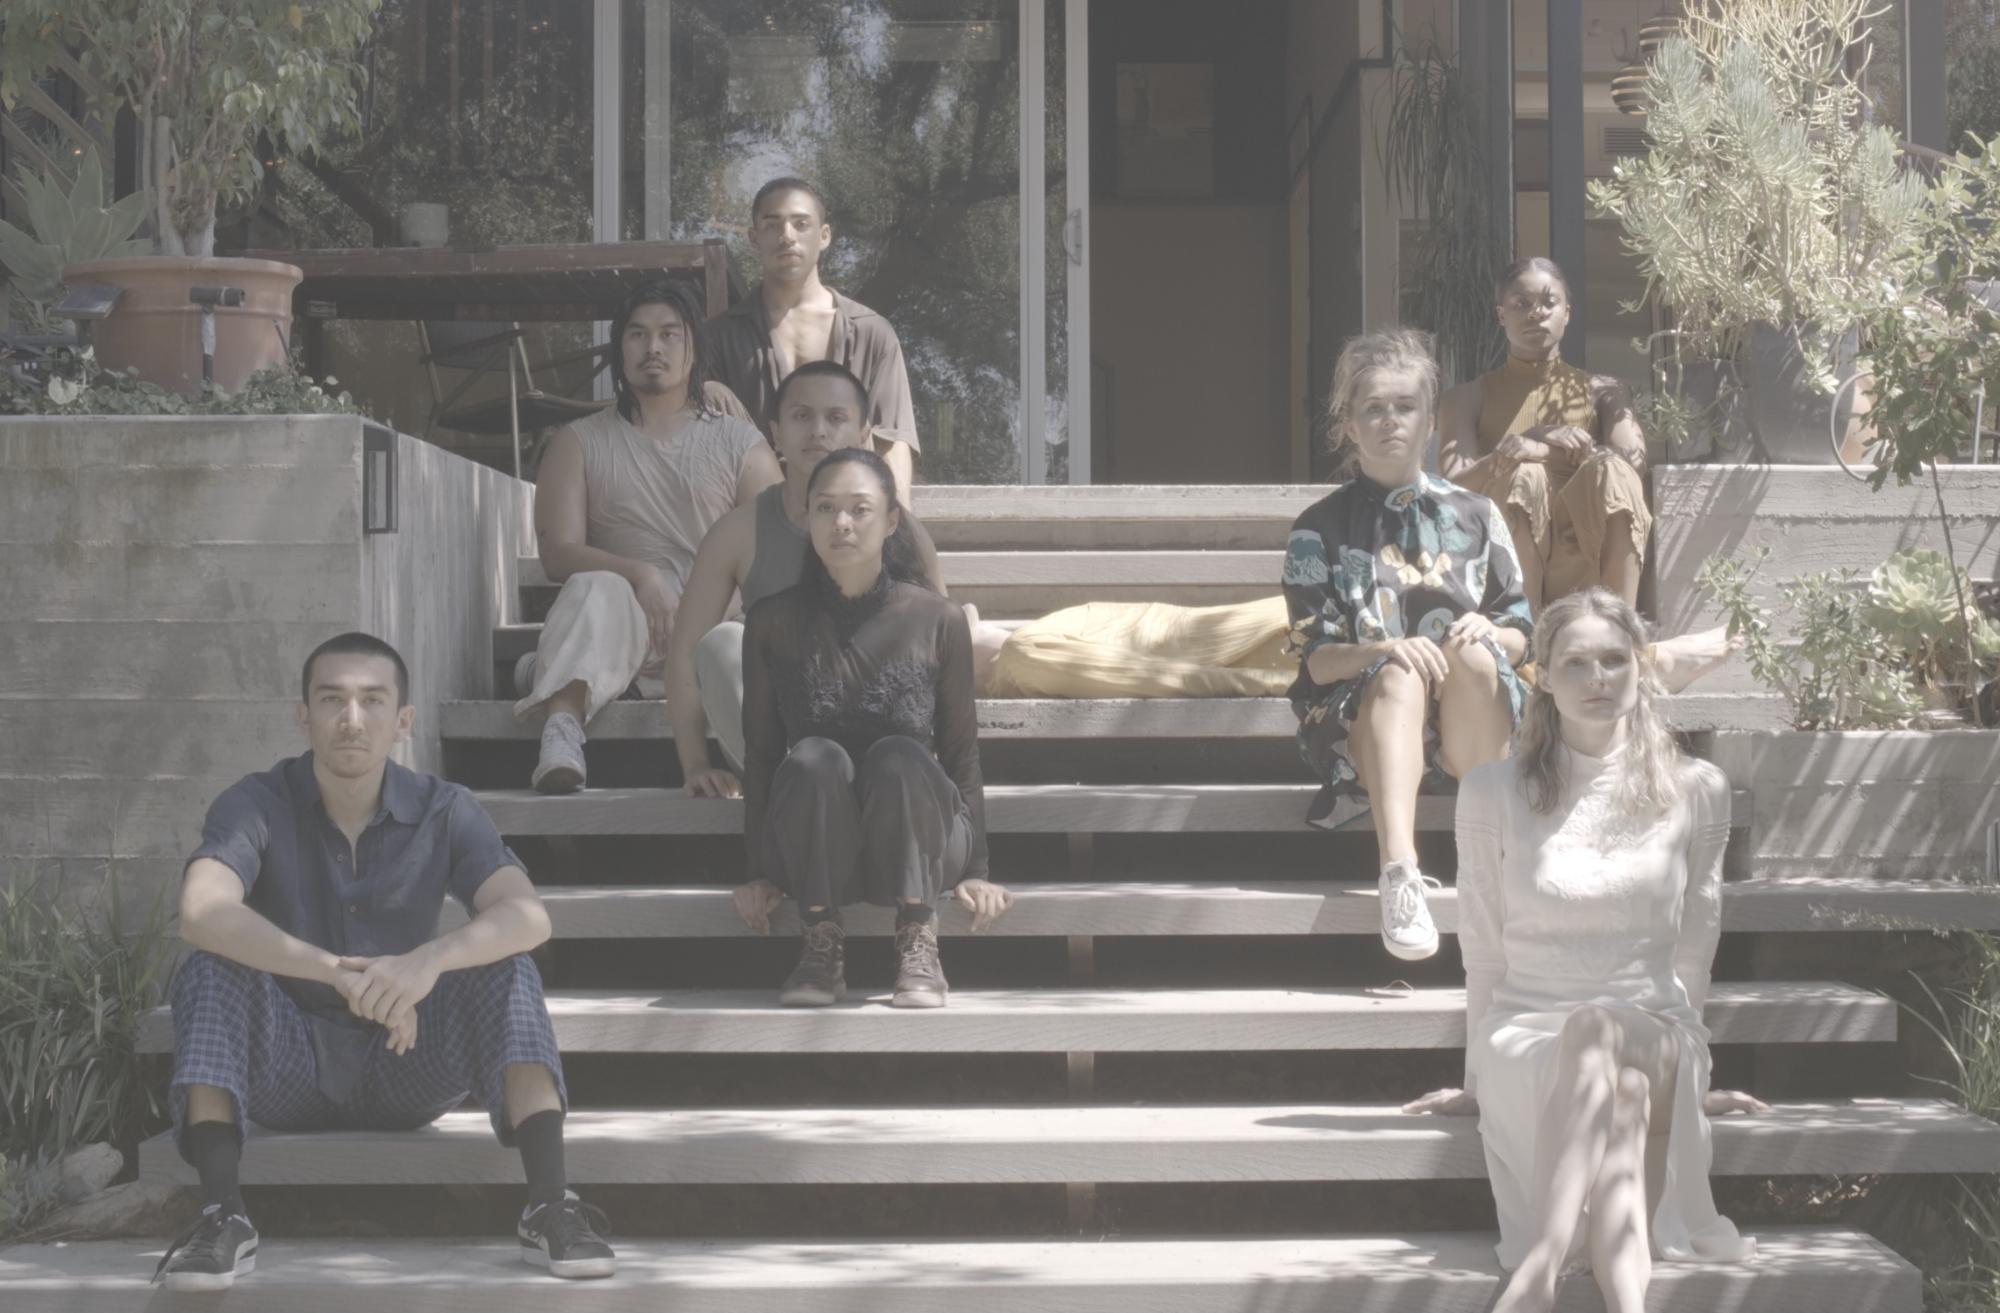 wide shot of 8 people sitting on a set of outdoor concrete stairs, with an additional person laying down, mostly obscured by the other bodies. The 8 people look out past the camera. The colors and tone of the photo feel muted and a bit nostalgic with mostly neutrals and earth tones. They are surrounded by foliage